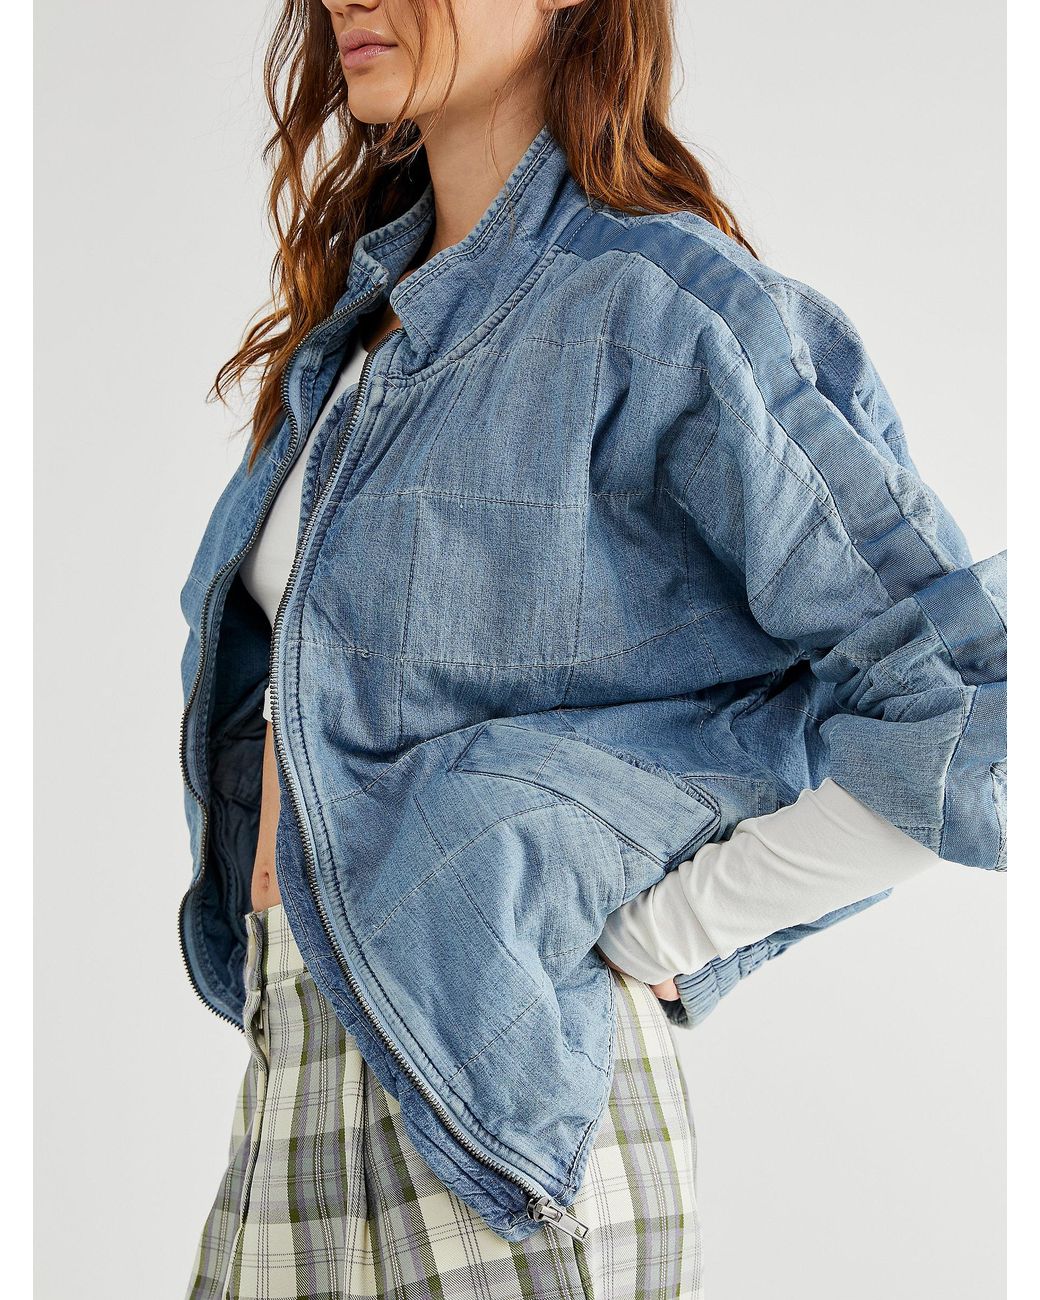 Free People Dolman Quilted Denim Jacket in Blue | Lyst Canada